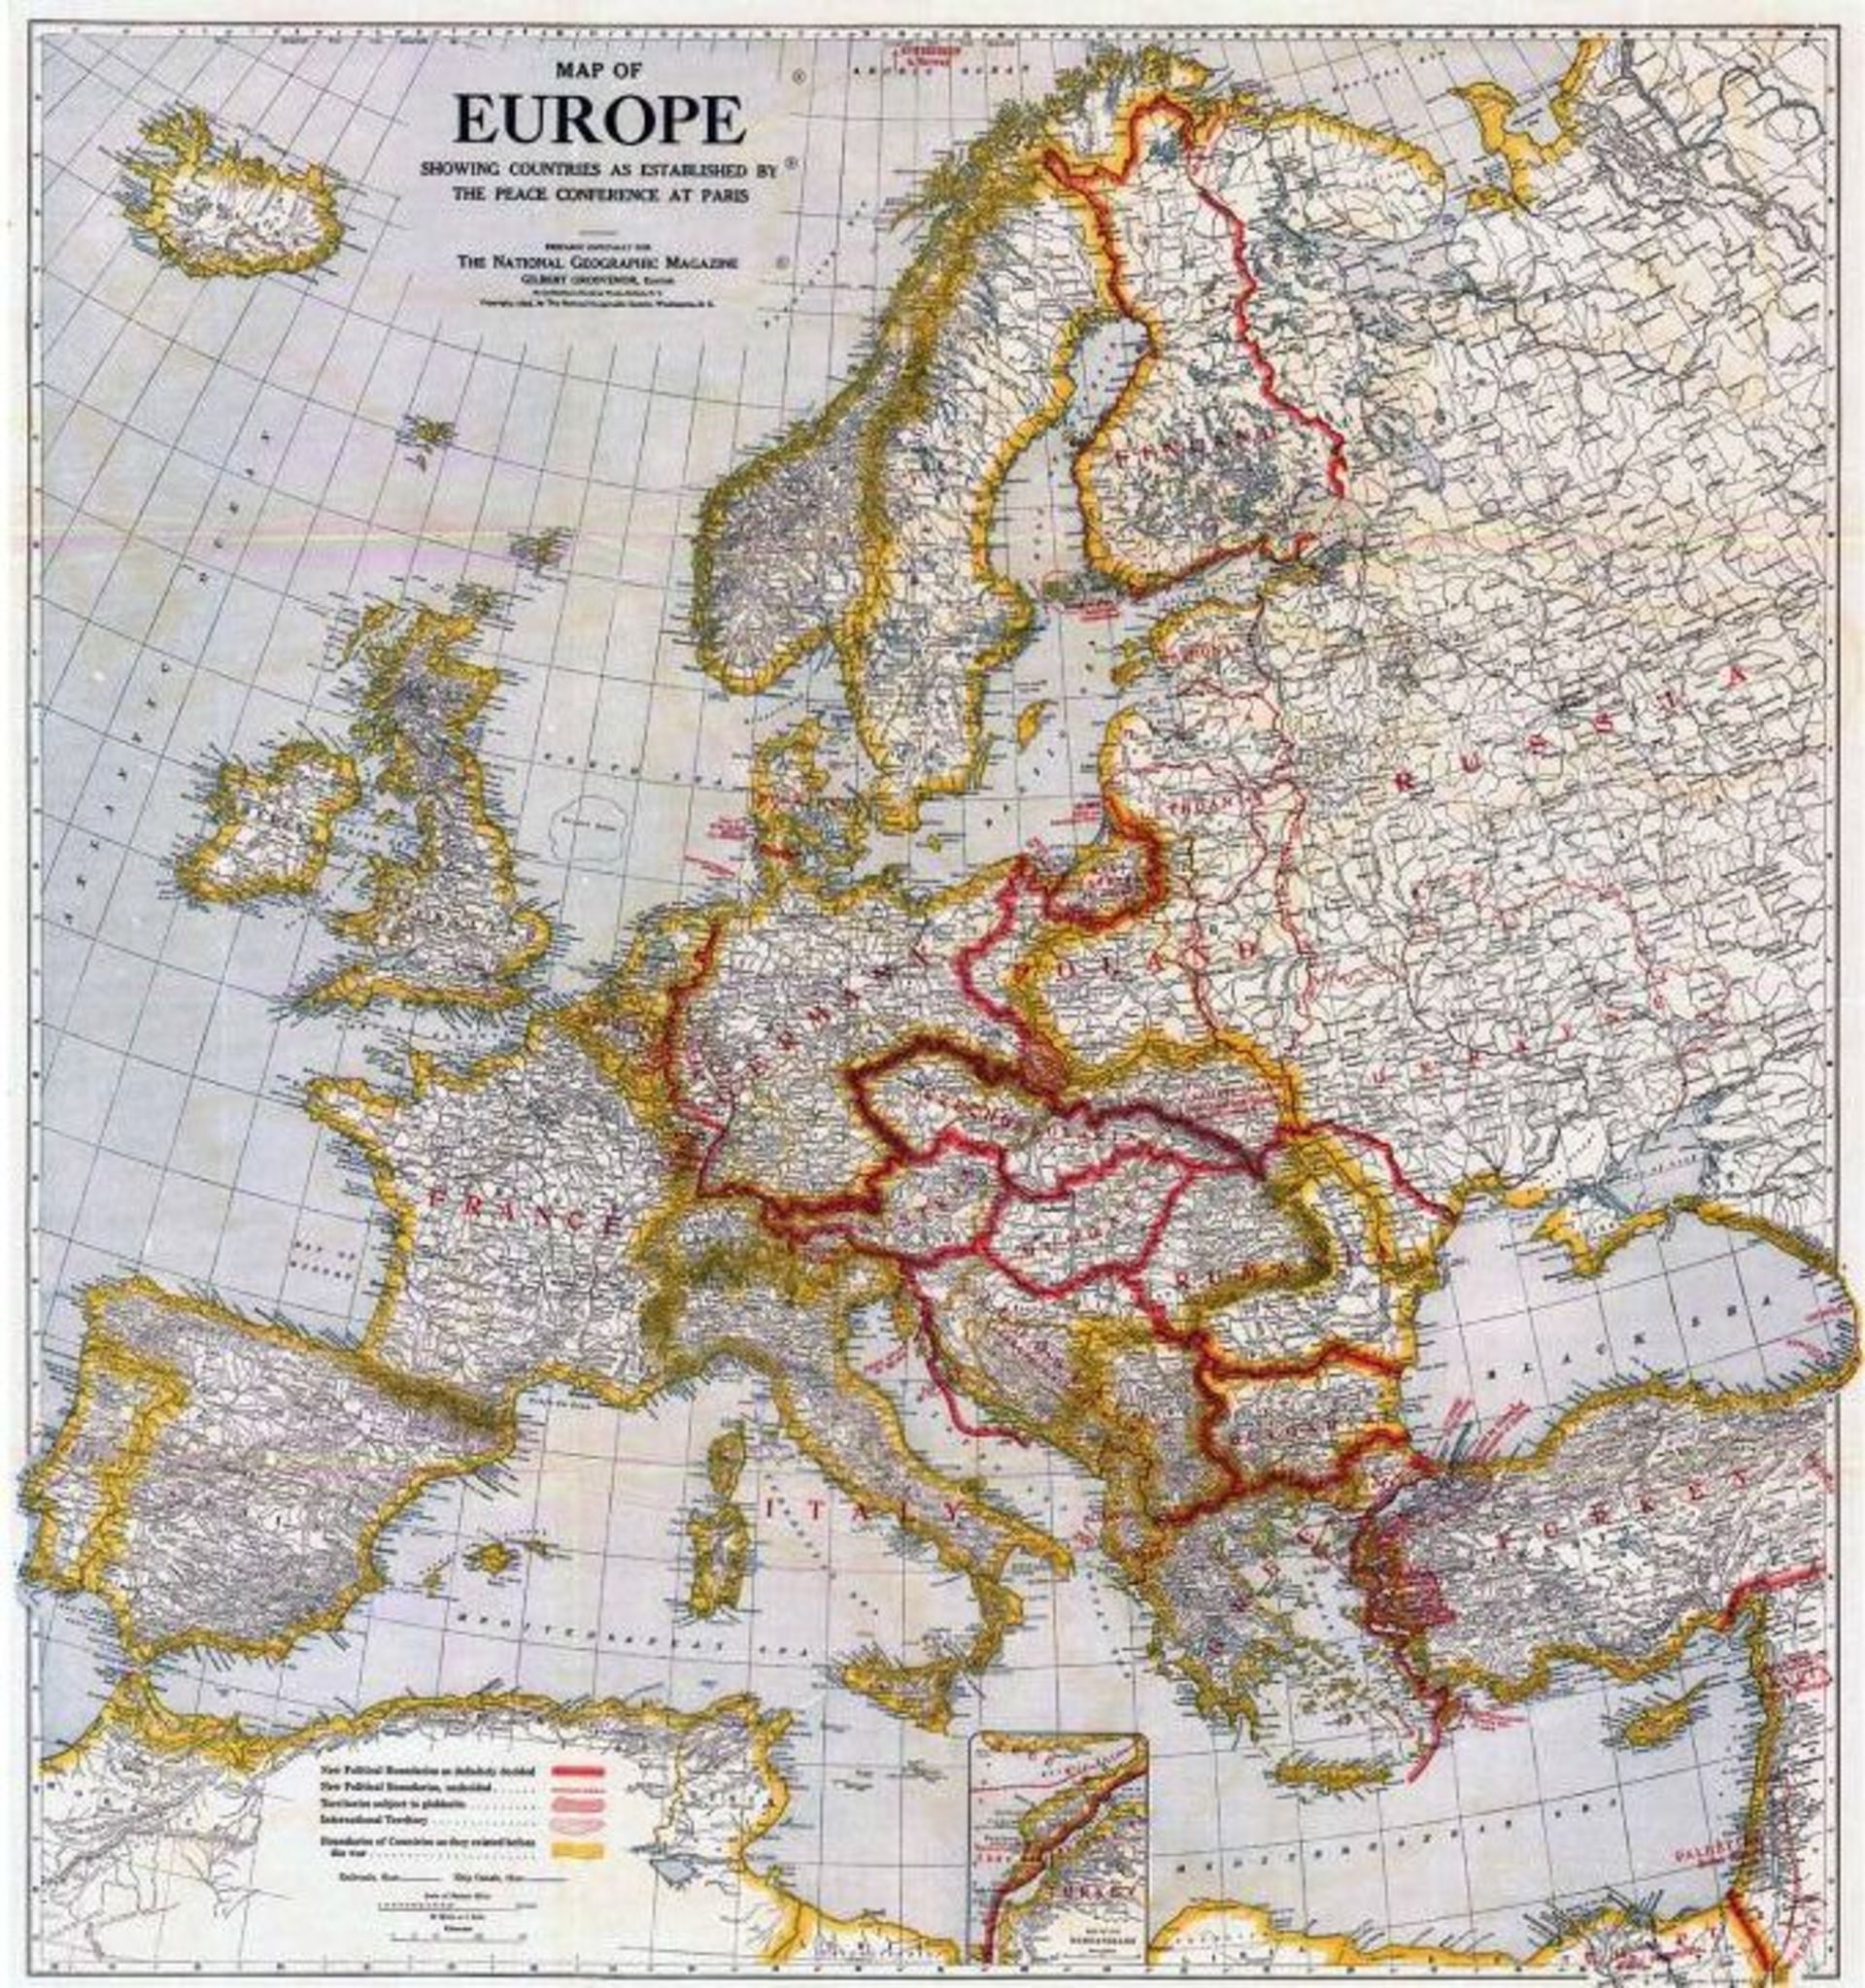 Europe After WW1